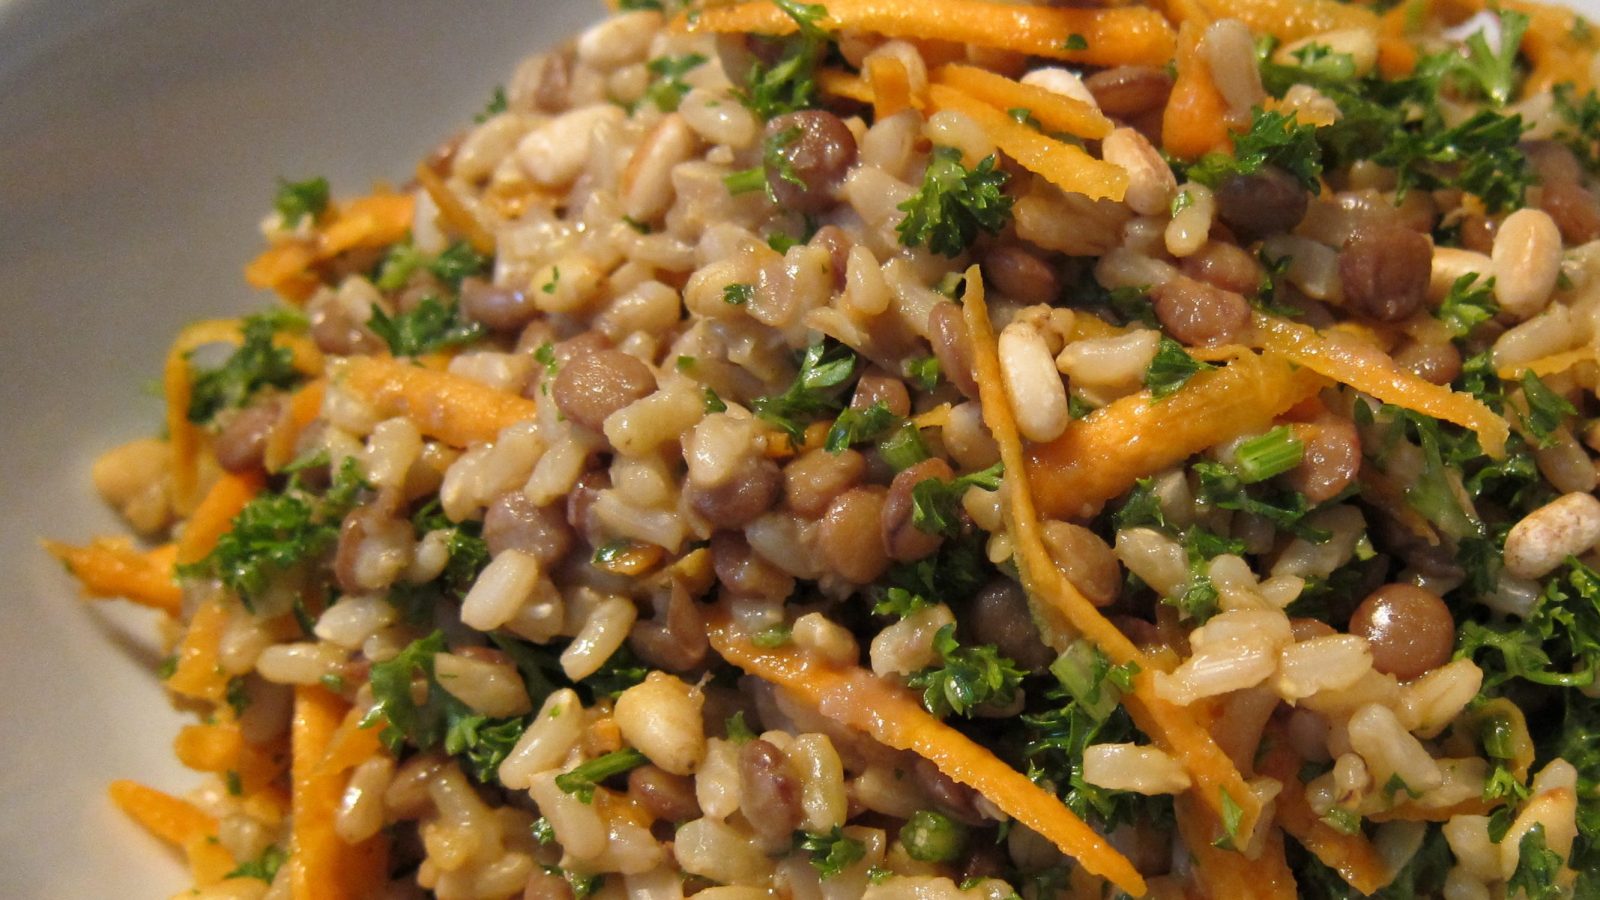 Brown rice , lentil, carrot and parsley salad close up